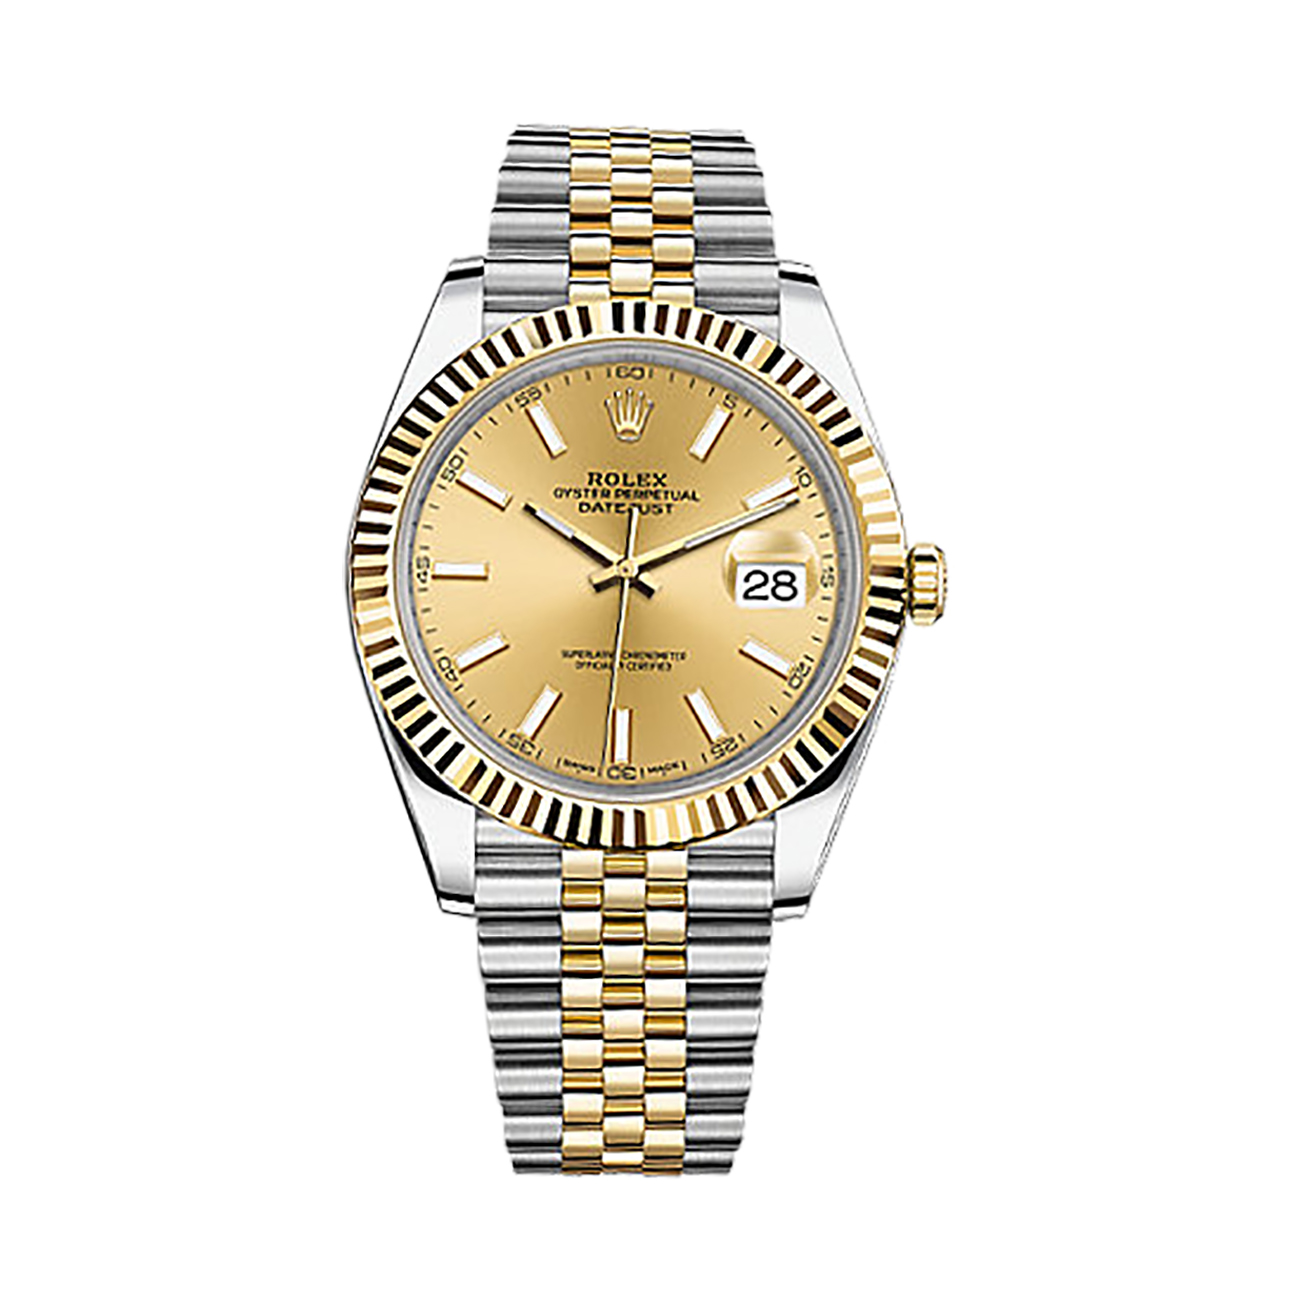 Datejust 41 126333 Gold & Stainless Steel Watch (Champagne)